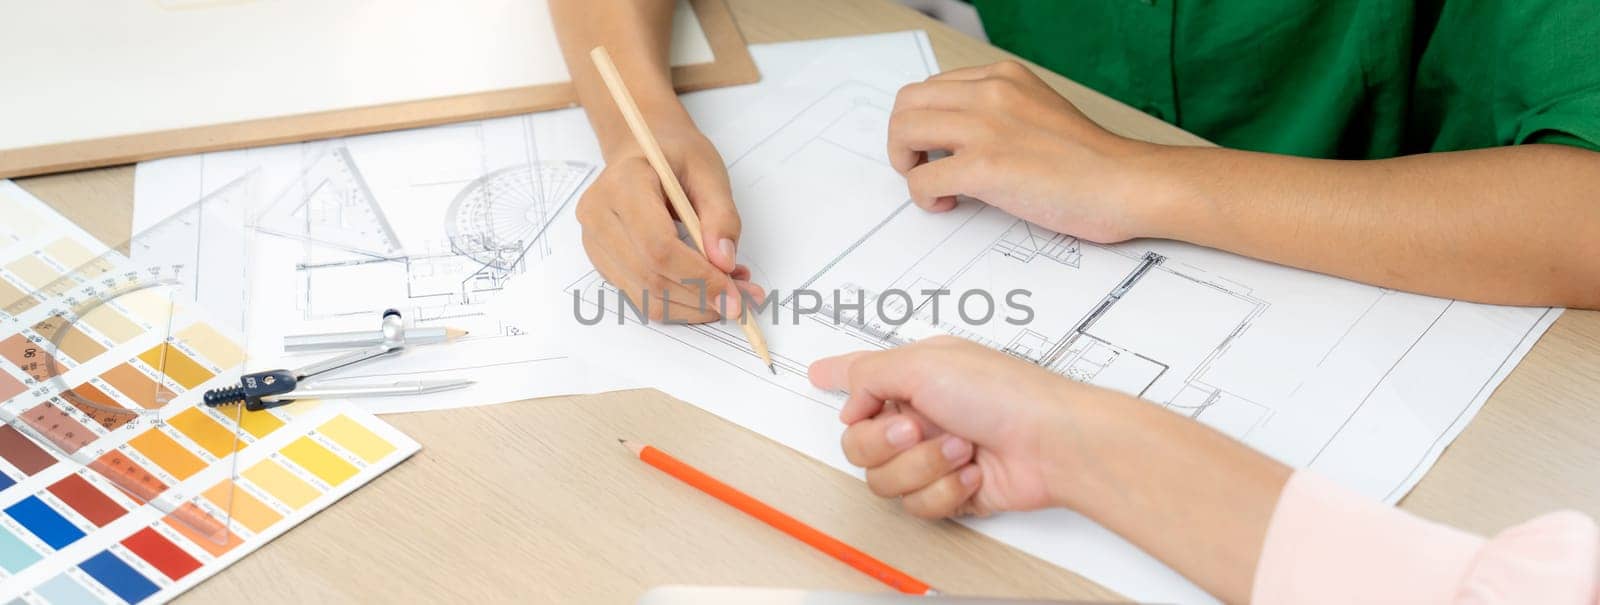 Professional architect drafts blueprint from project manager advice on table with house model, color palette and architectural equipment. Creative design concept. Focus on hand. Closeup. Variegated.